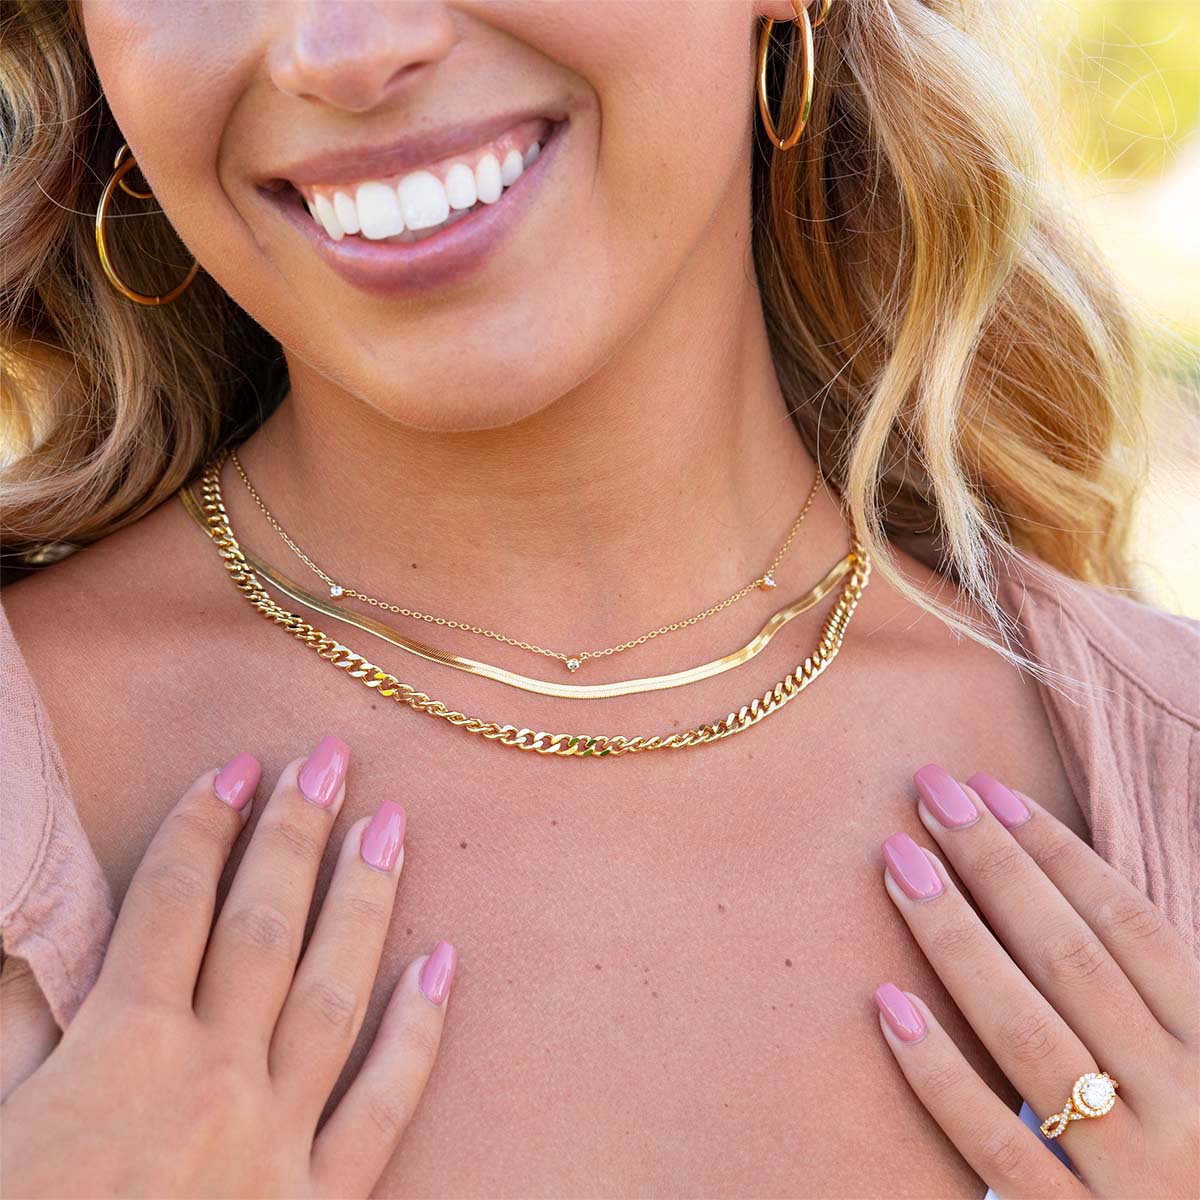 Cute layered gold necklaces on model